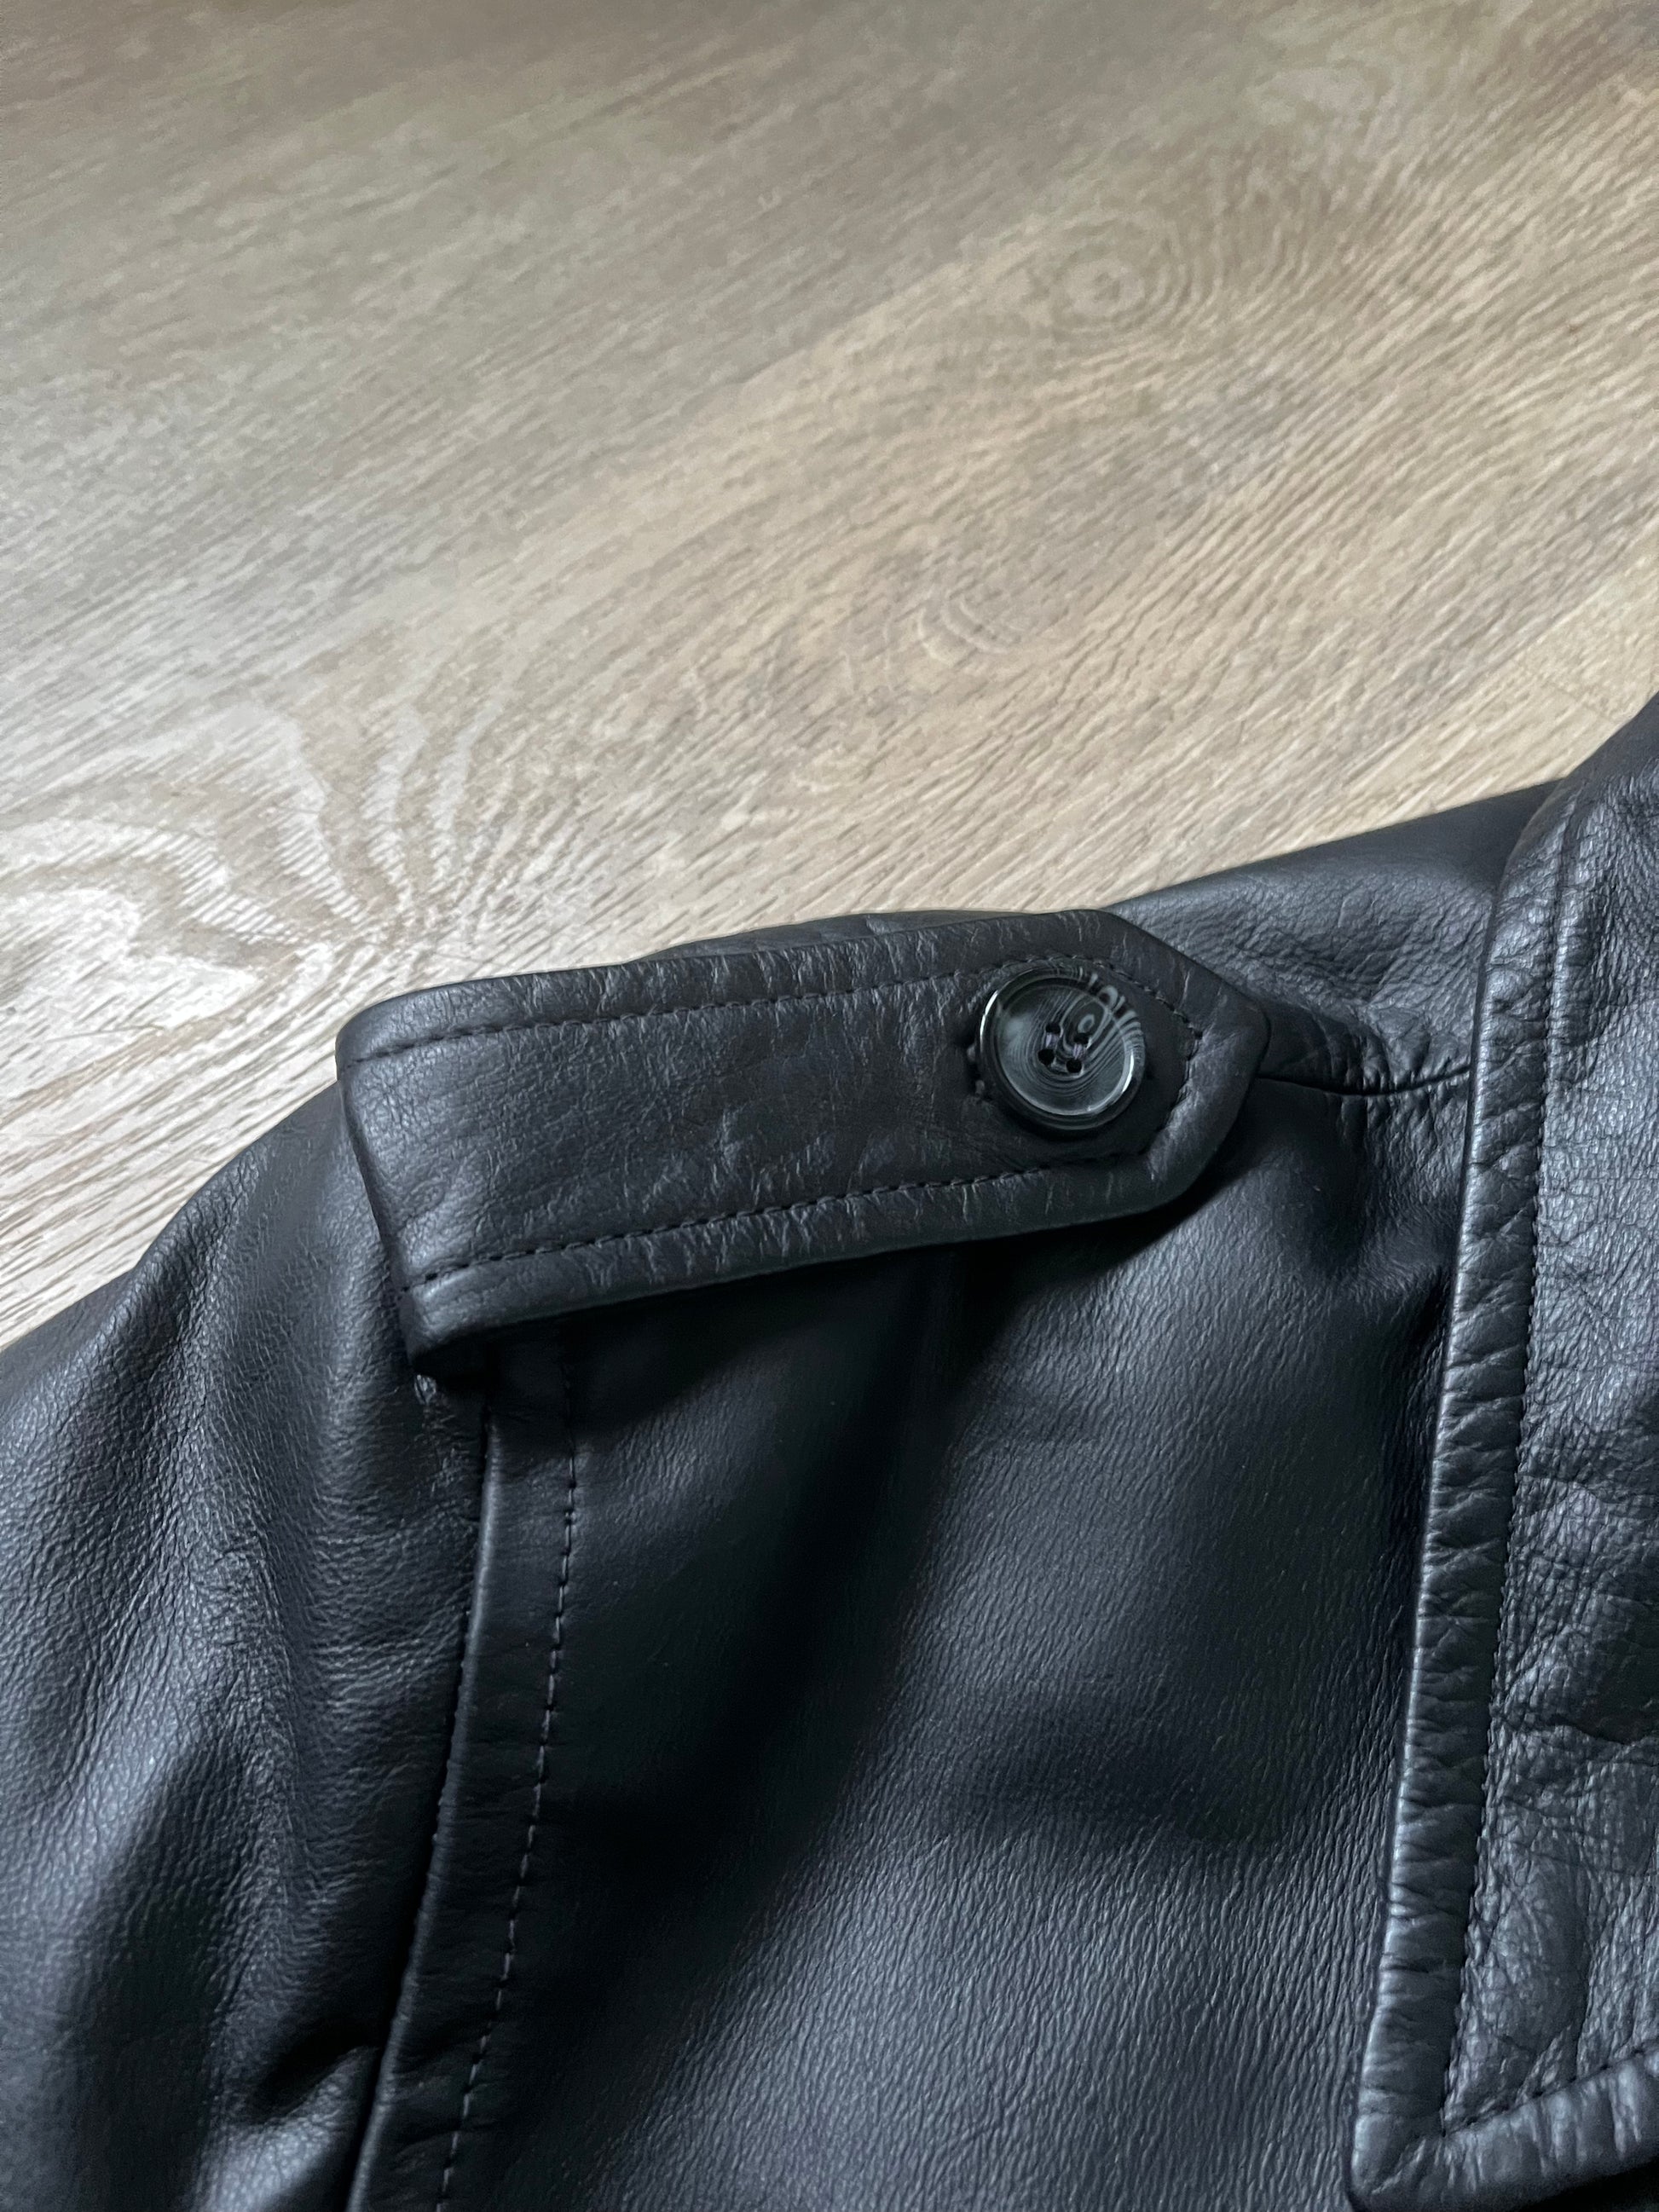 Paramount Pictures Vintage Buffalo Leather Coat – Gyvulys